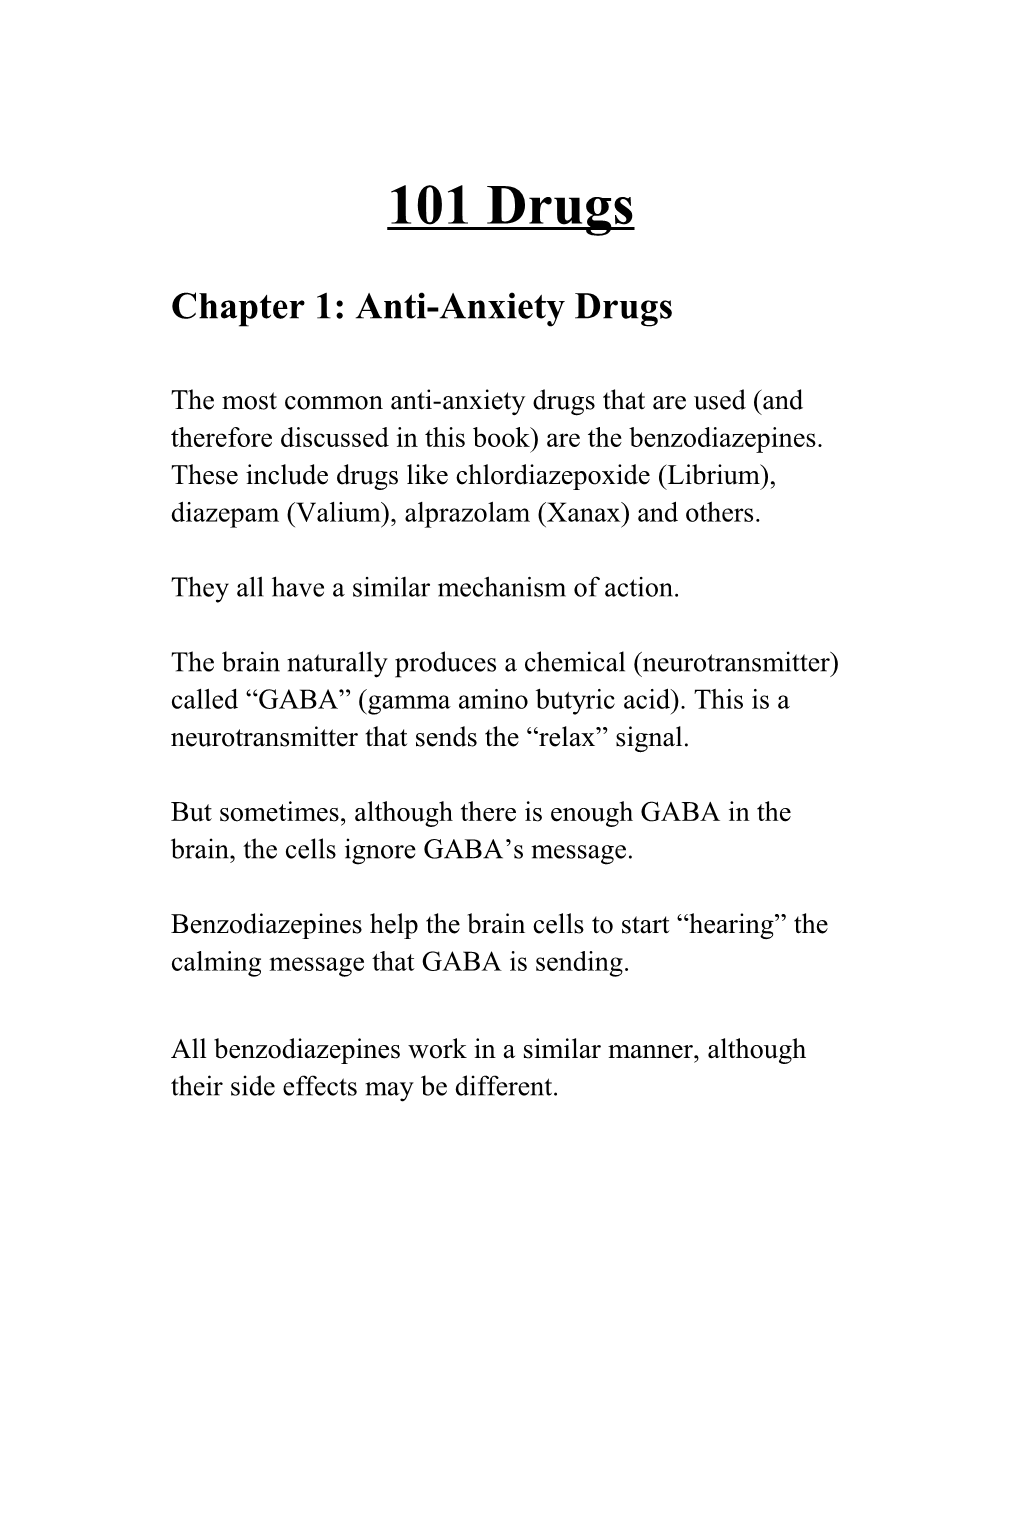 Chapter 1: Anti-Anxiety Drugs